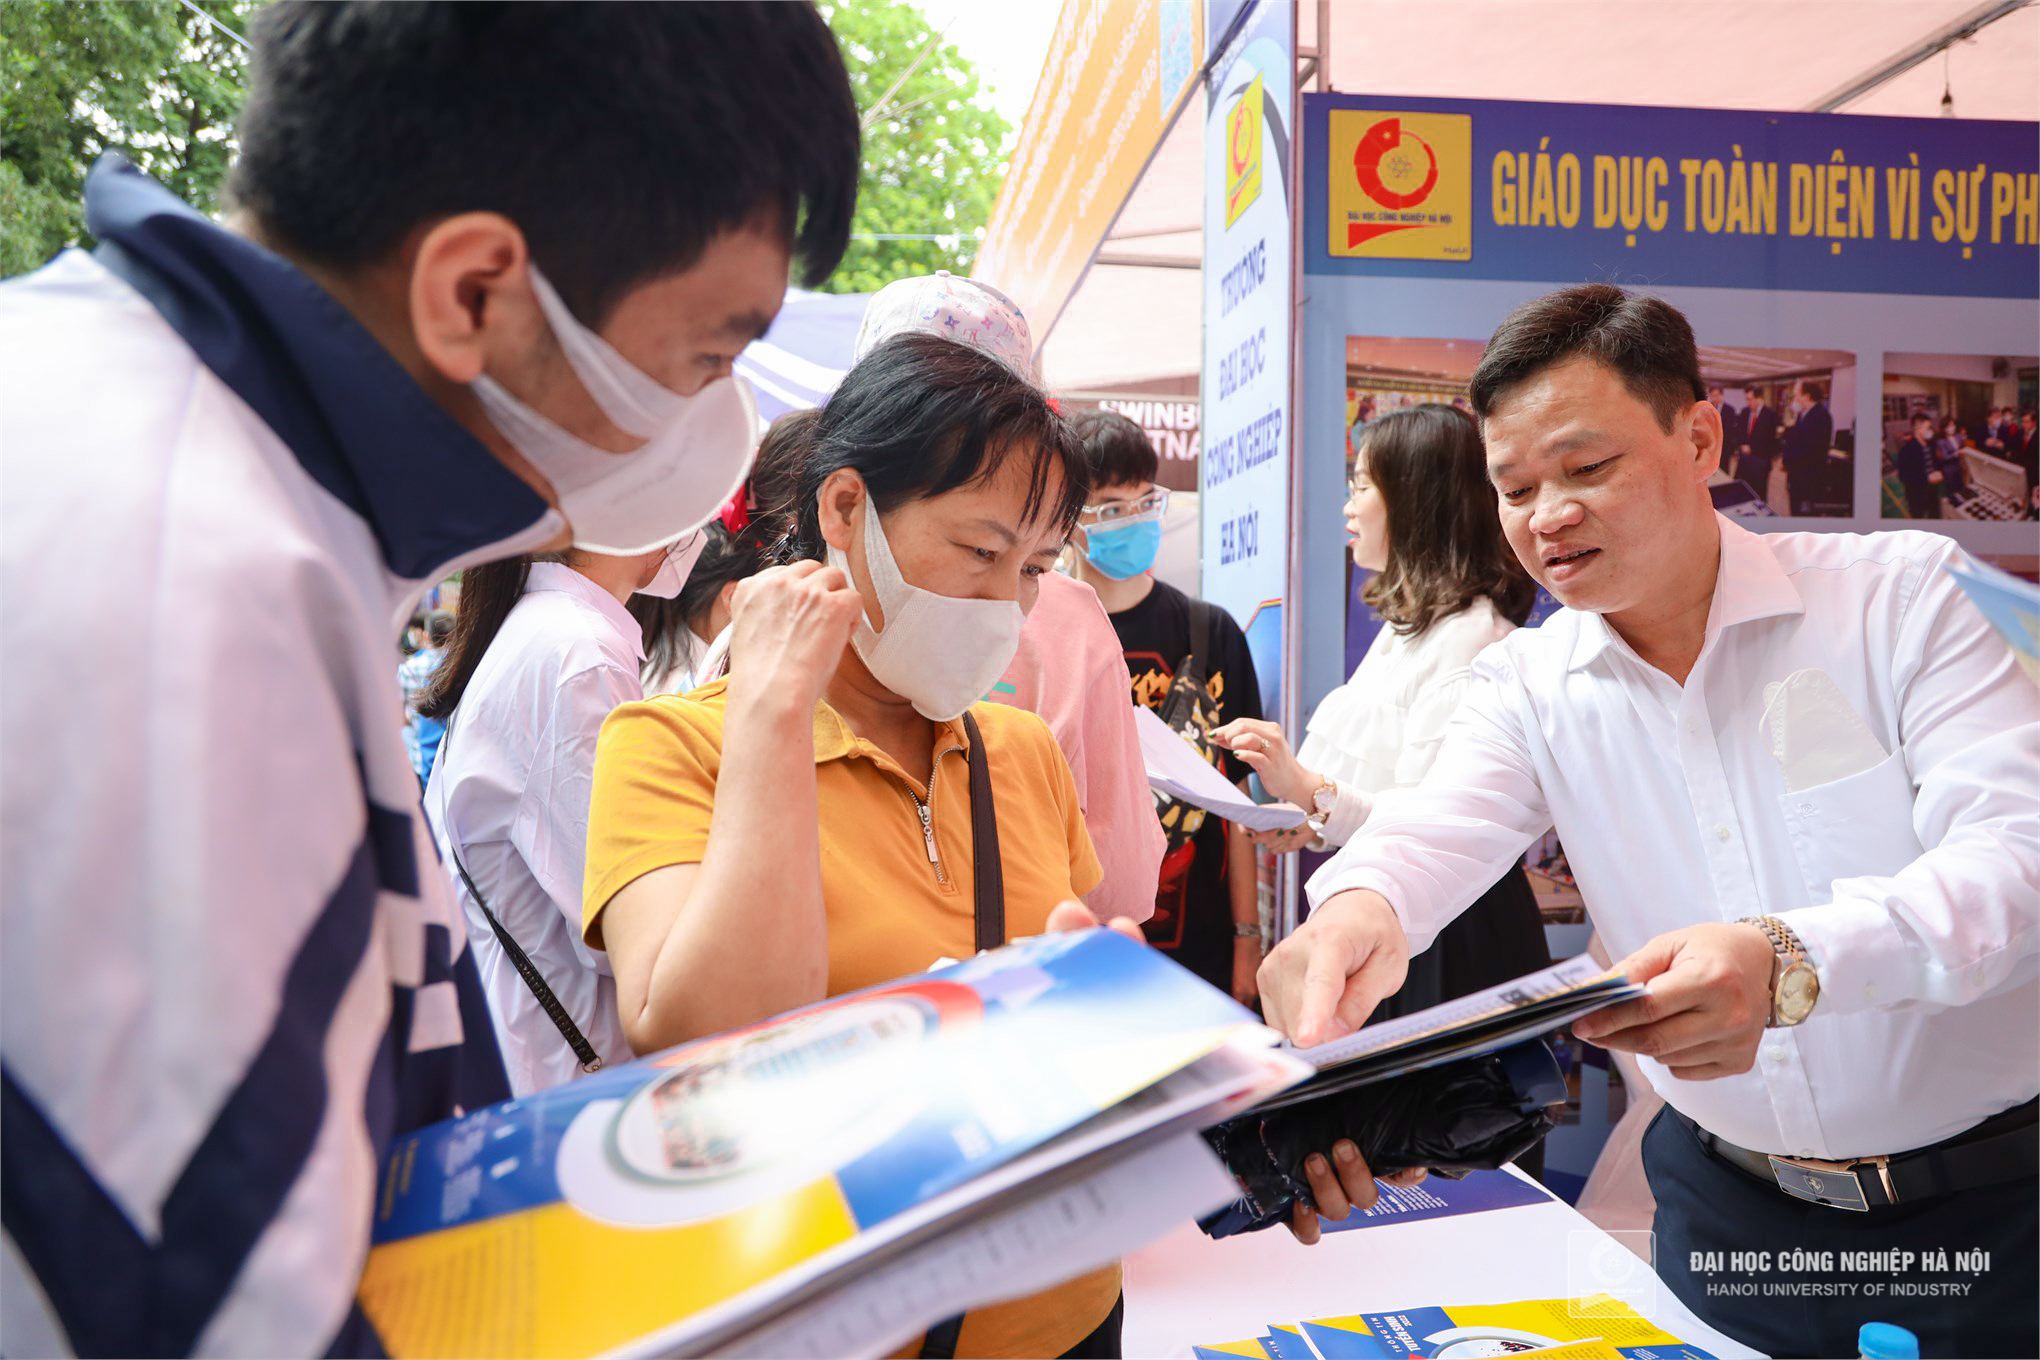 The Admission Consultation and Career Orientation Day 2022: the consultancy space of Hanoi University of Industry attracted over 14,000 visits